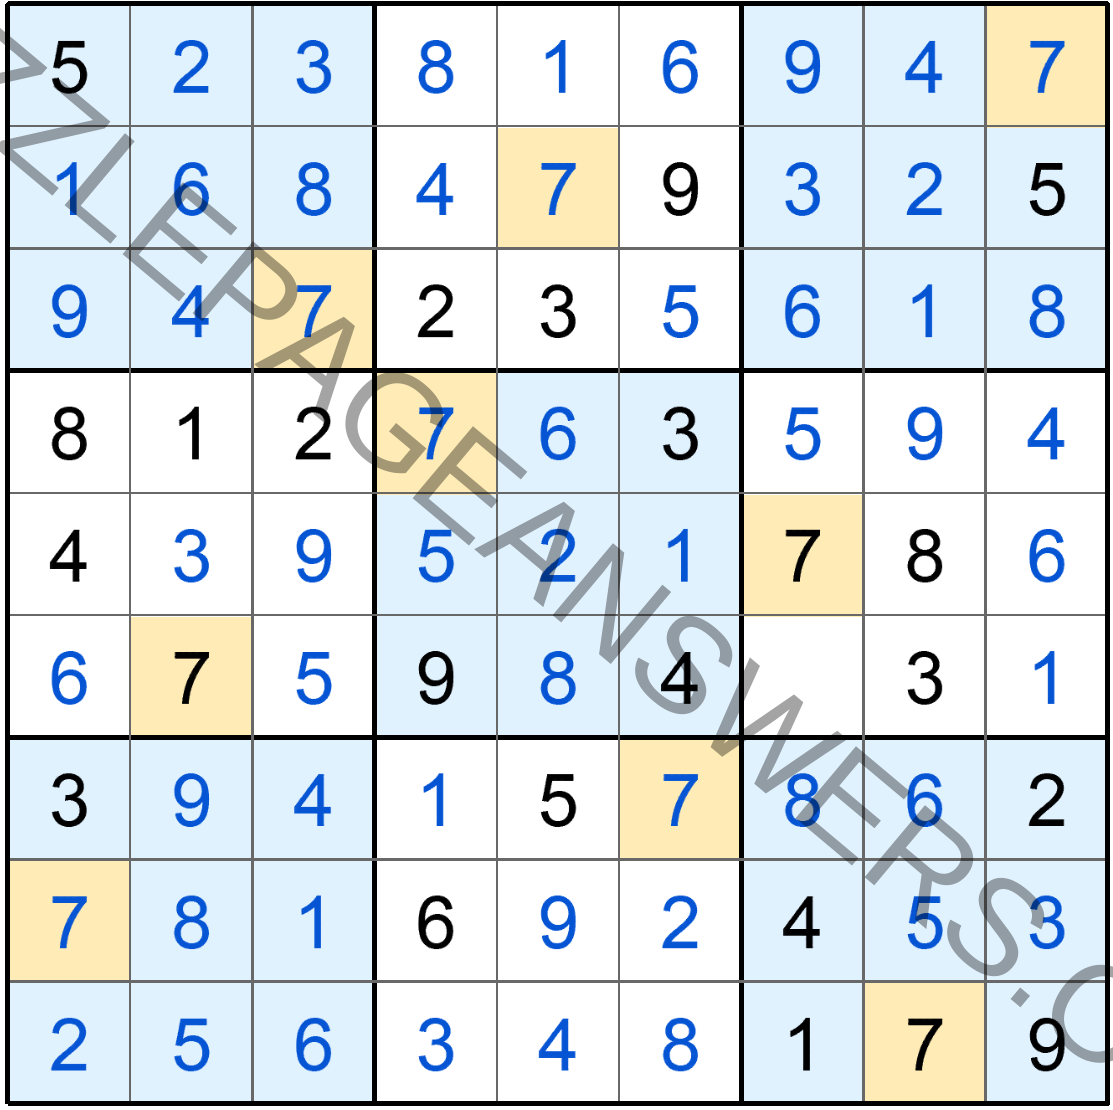 Puzzle Page Sudoku February 20 2020 Answers Puzzle Page Answers